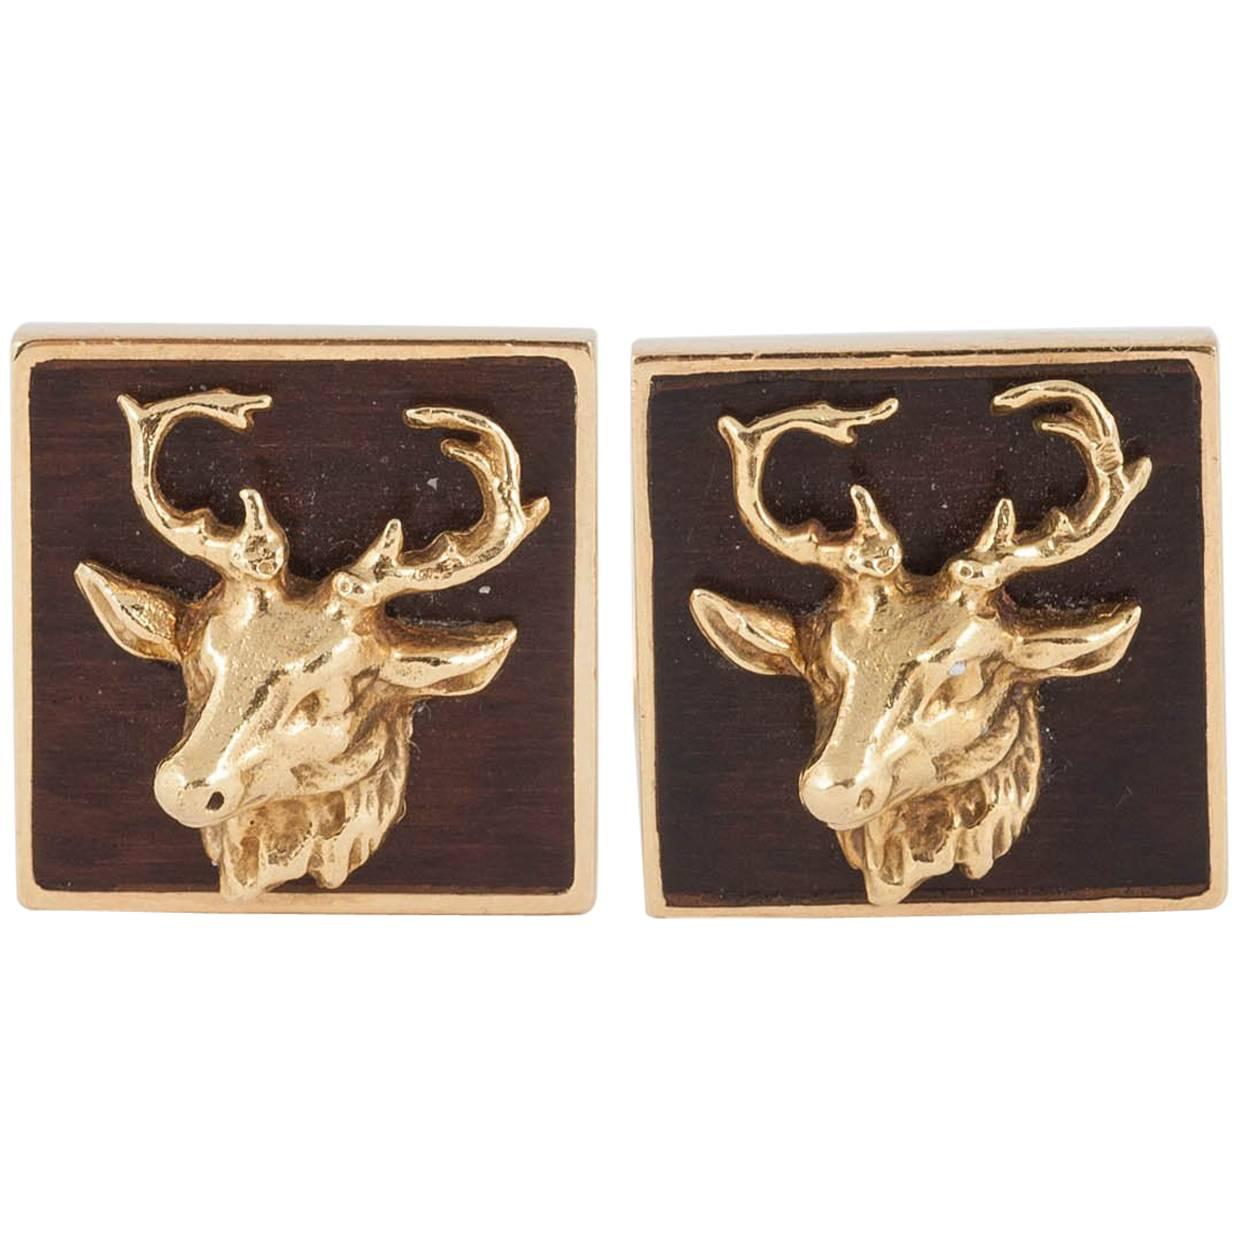  Stags head Cufflinks with Bog Oak Background, by Bry of Paris, c, 1930